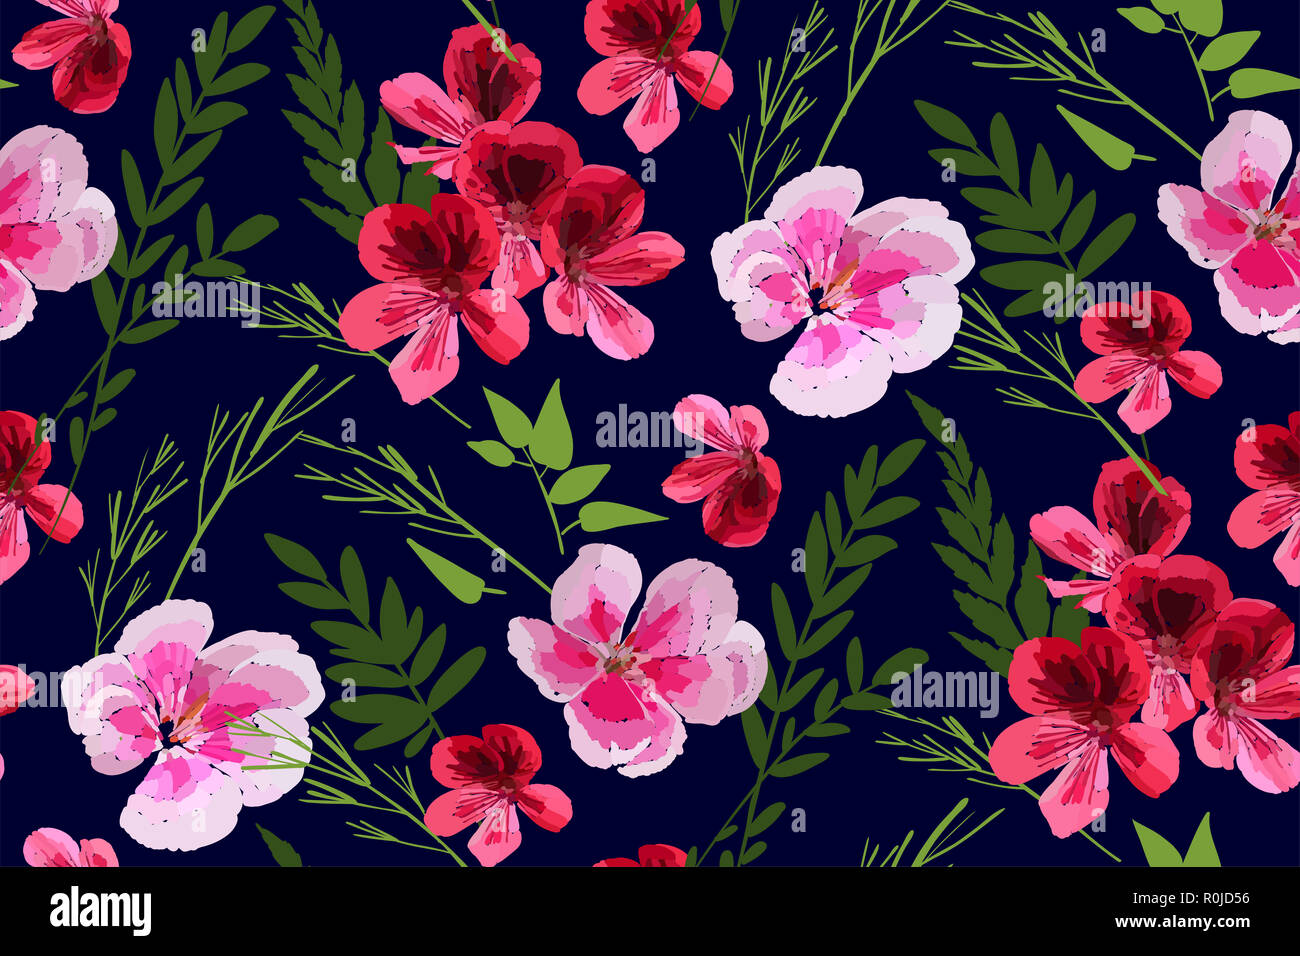 Floral seamless pattern with different flowers and leaves. Botanical  illustration hand painted. Textile print, fabric swatch, wrapping paper.  Vector Stock Photo - Alamy